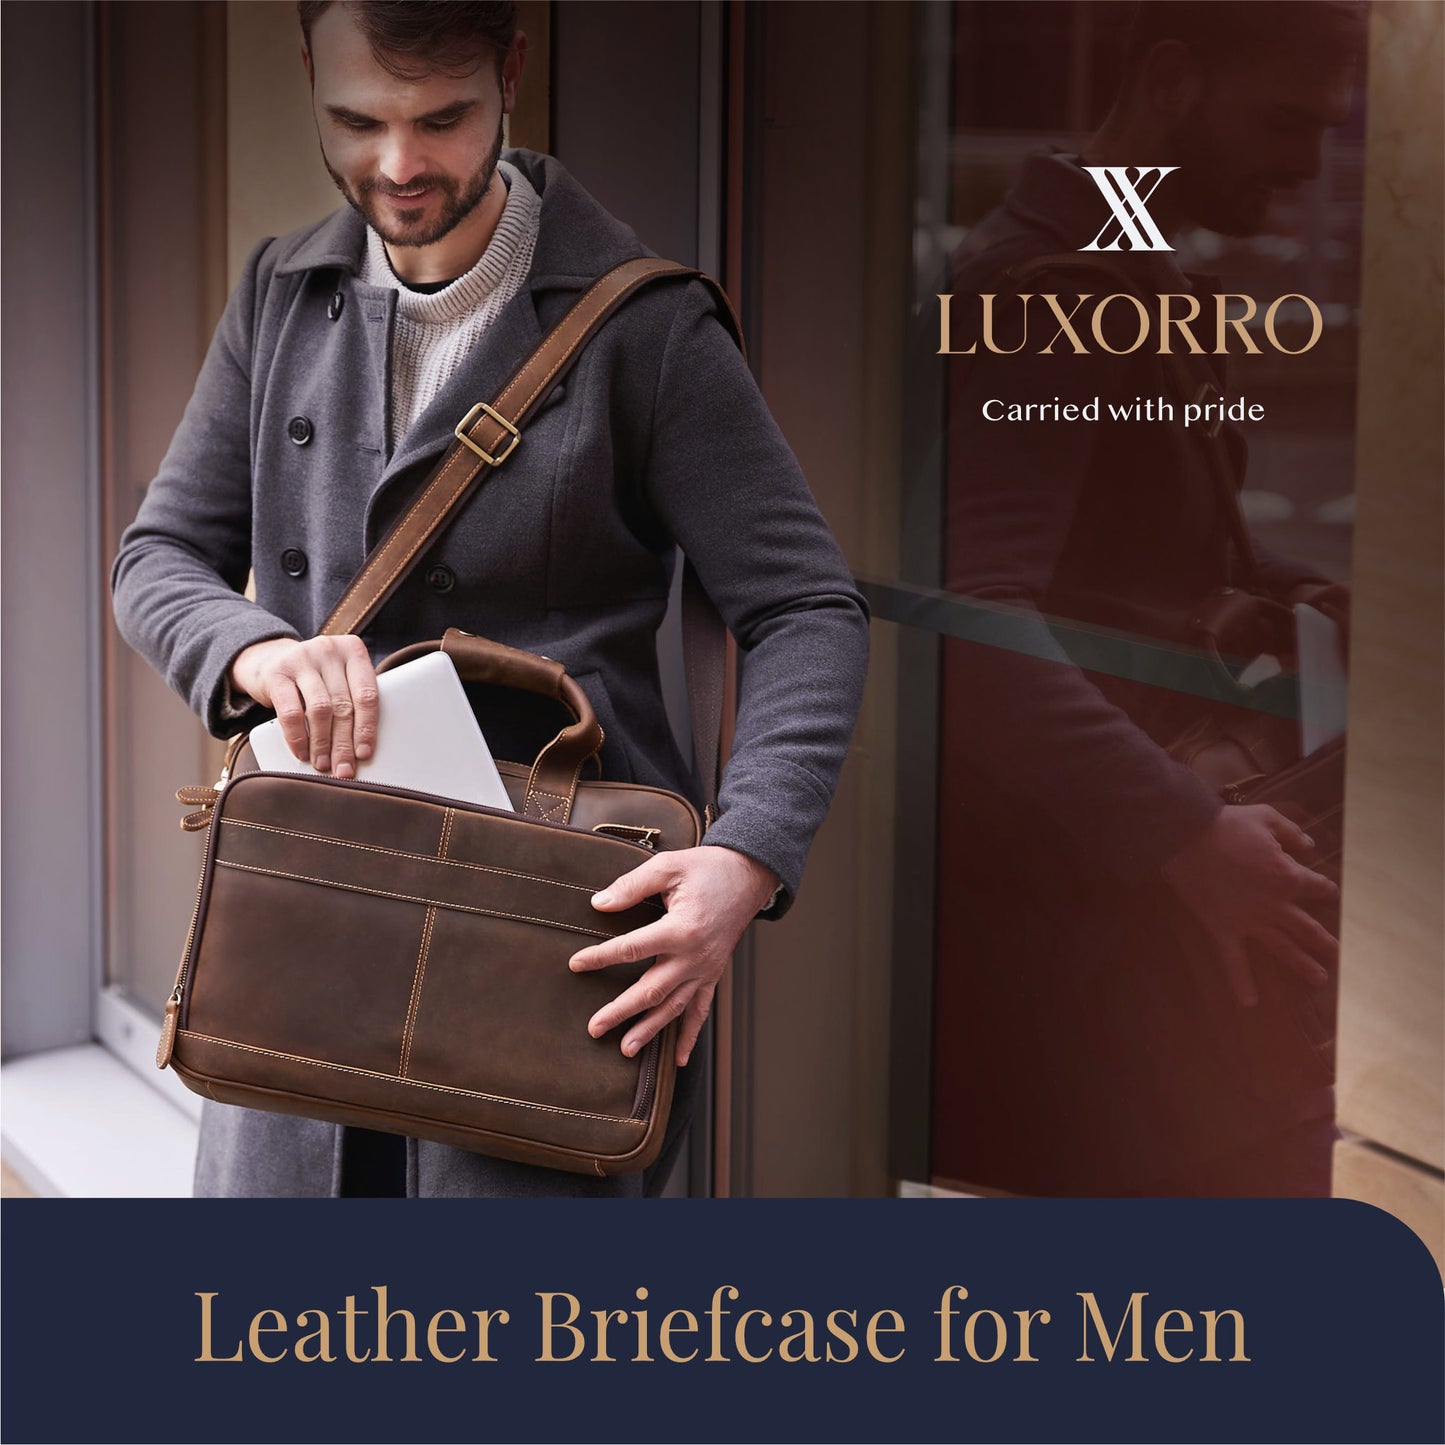 Luxorro Full Grain Leather Briefcases For Men in a Beautiful Gift Box, Fits 15.6" Laptop, 2 Compartments - Dark Brown- B08FZB9SDP - A